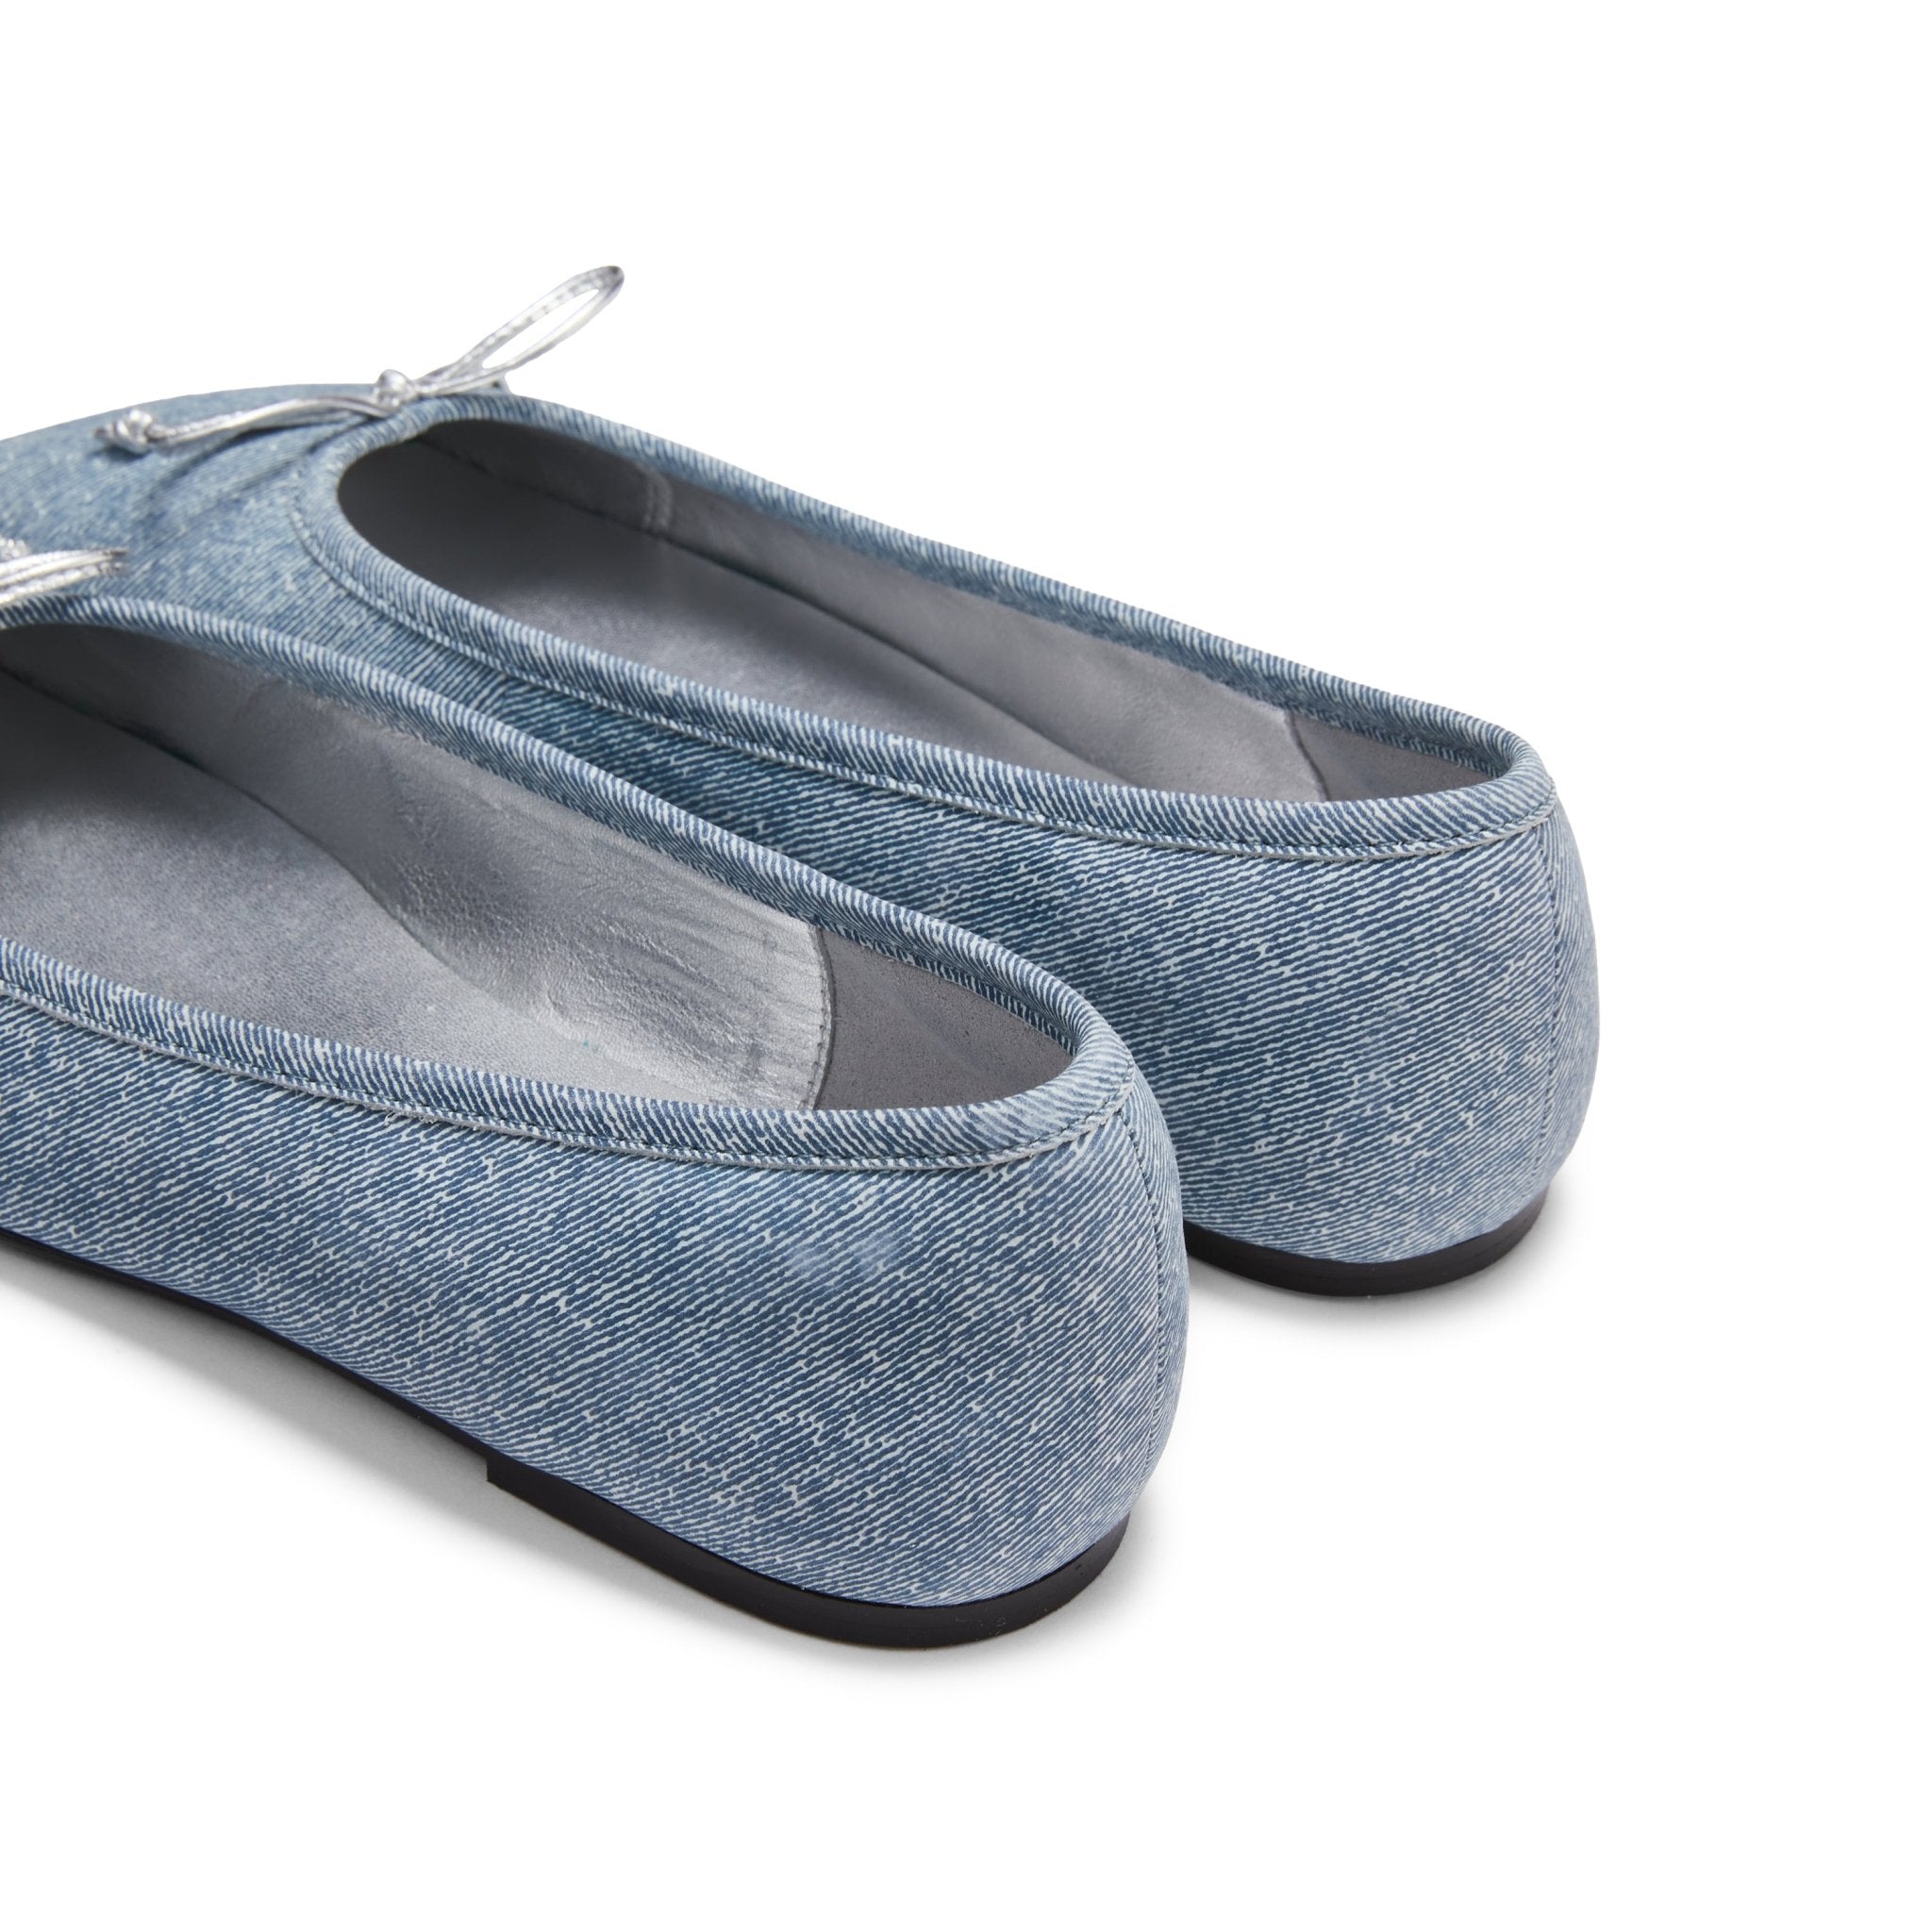 LOST IN ECHO Denim Square Toe Bow Ballet Shoes | MADA IN CHINA